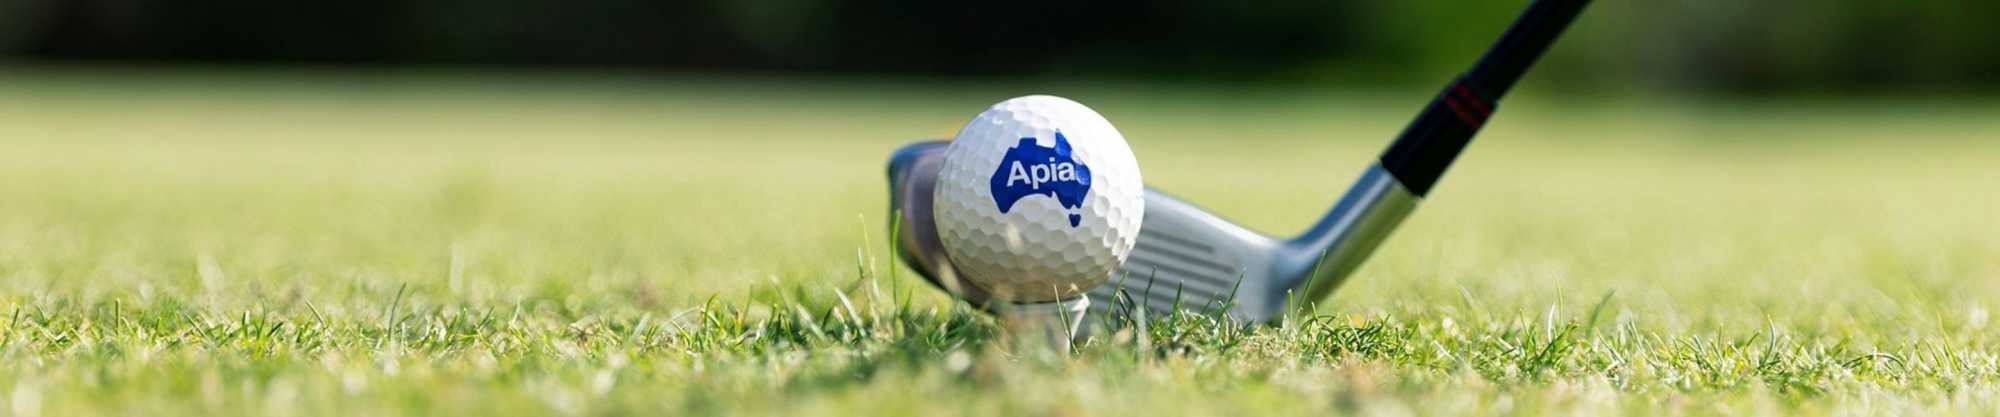 Get Into Golf Seniors and Apia